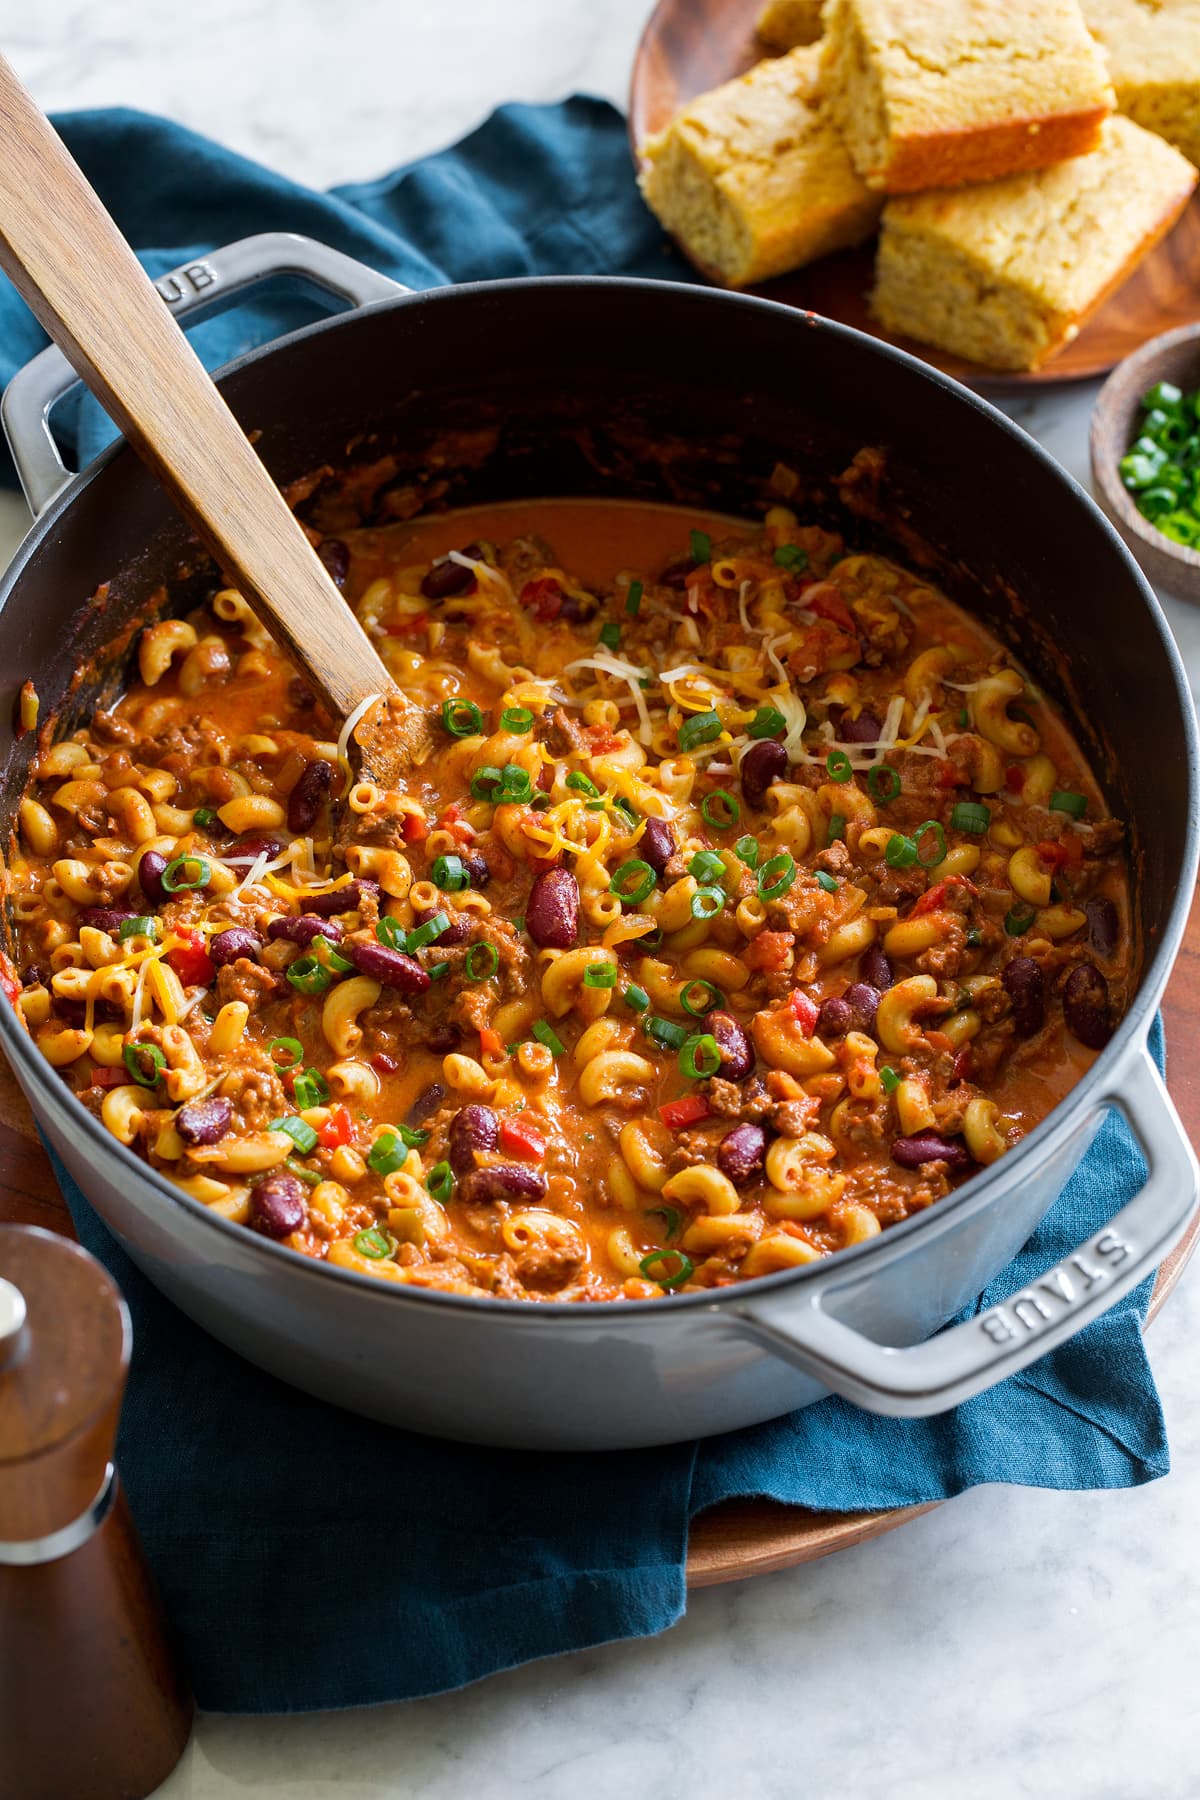 Chili mac in a large pot with a wooden spoon scooping mixture.